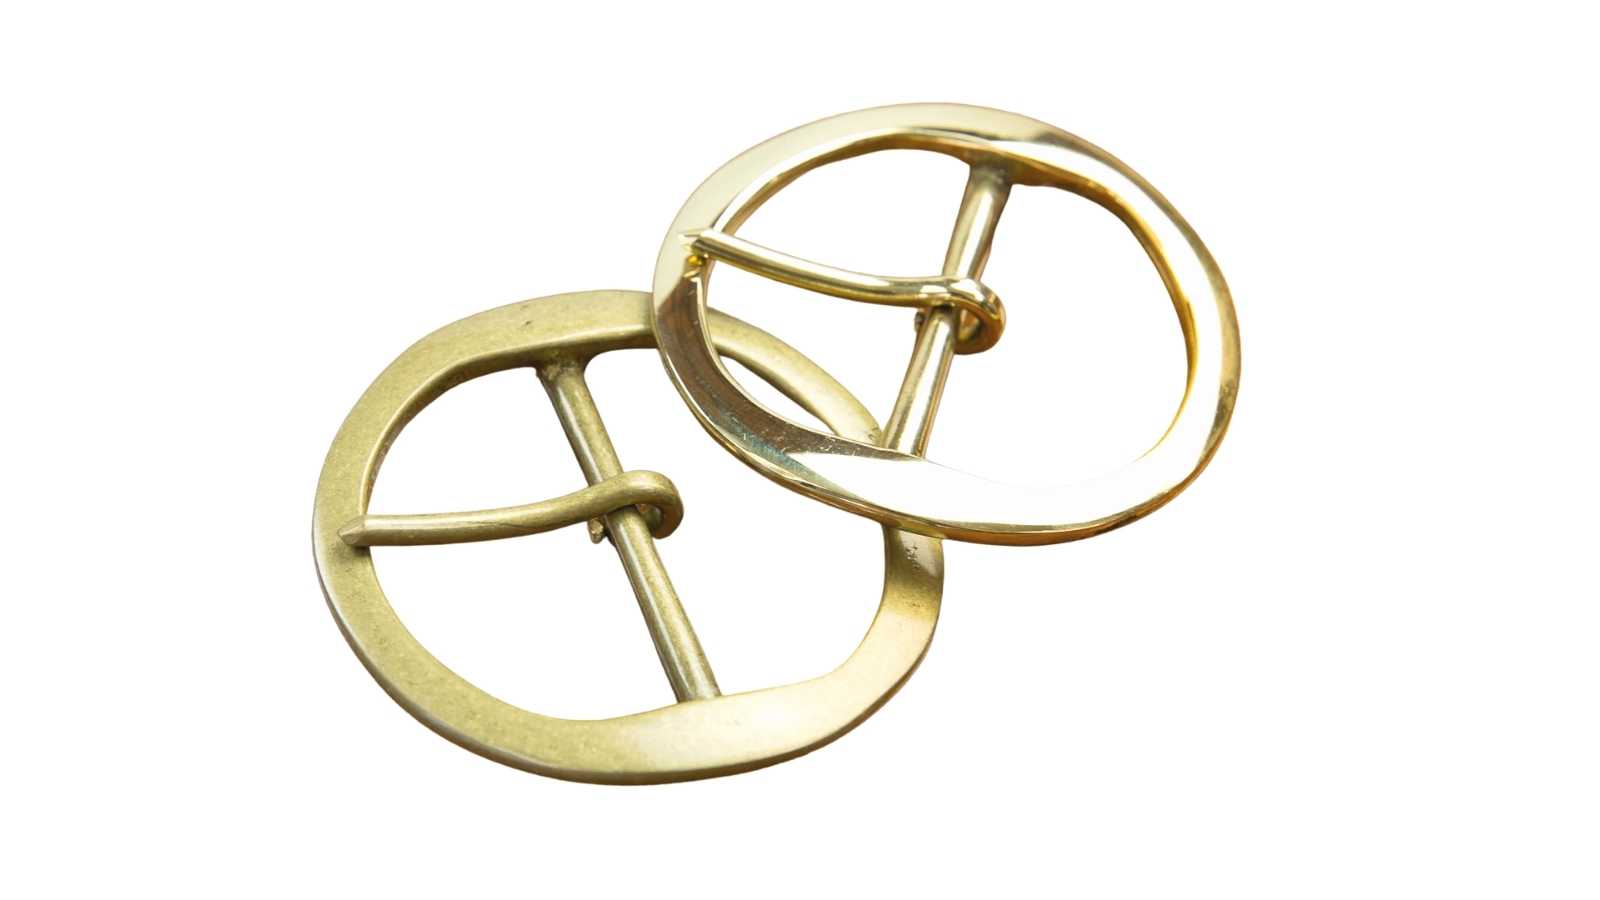 round buckles showing brass and antique finishes